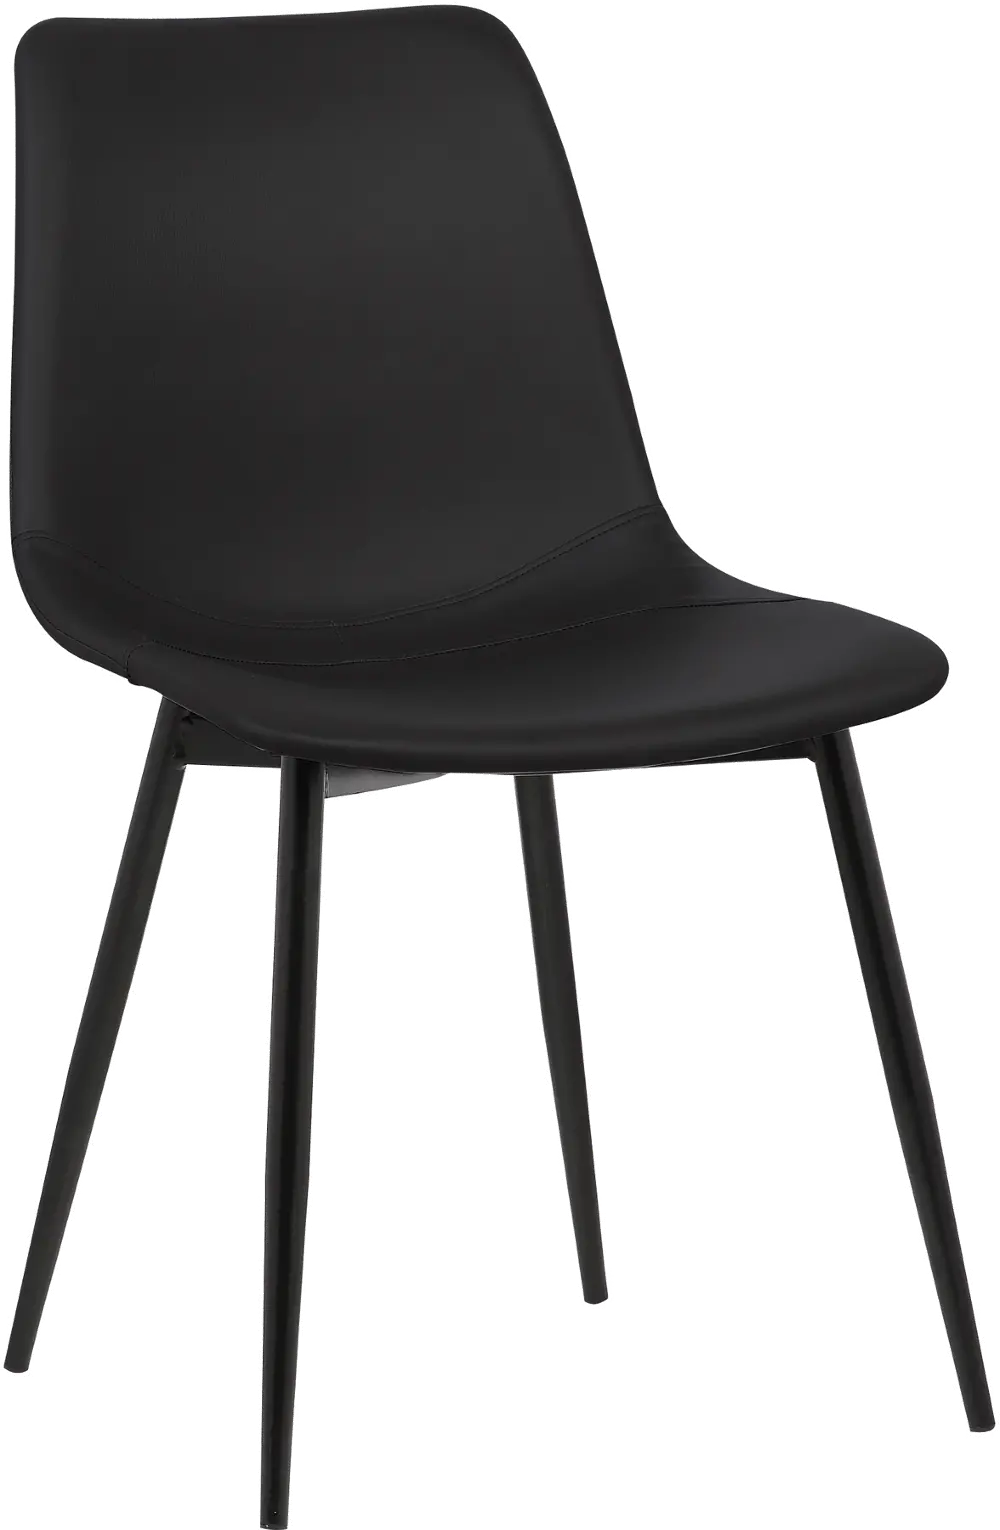 LCMOCHBLACK Monte Black Upholstered Dining Room Chair-1